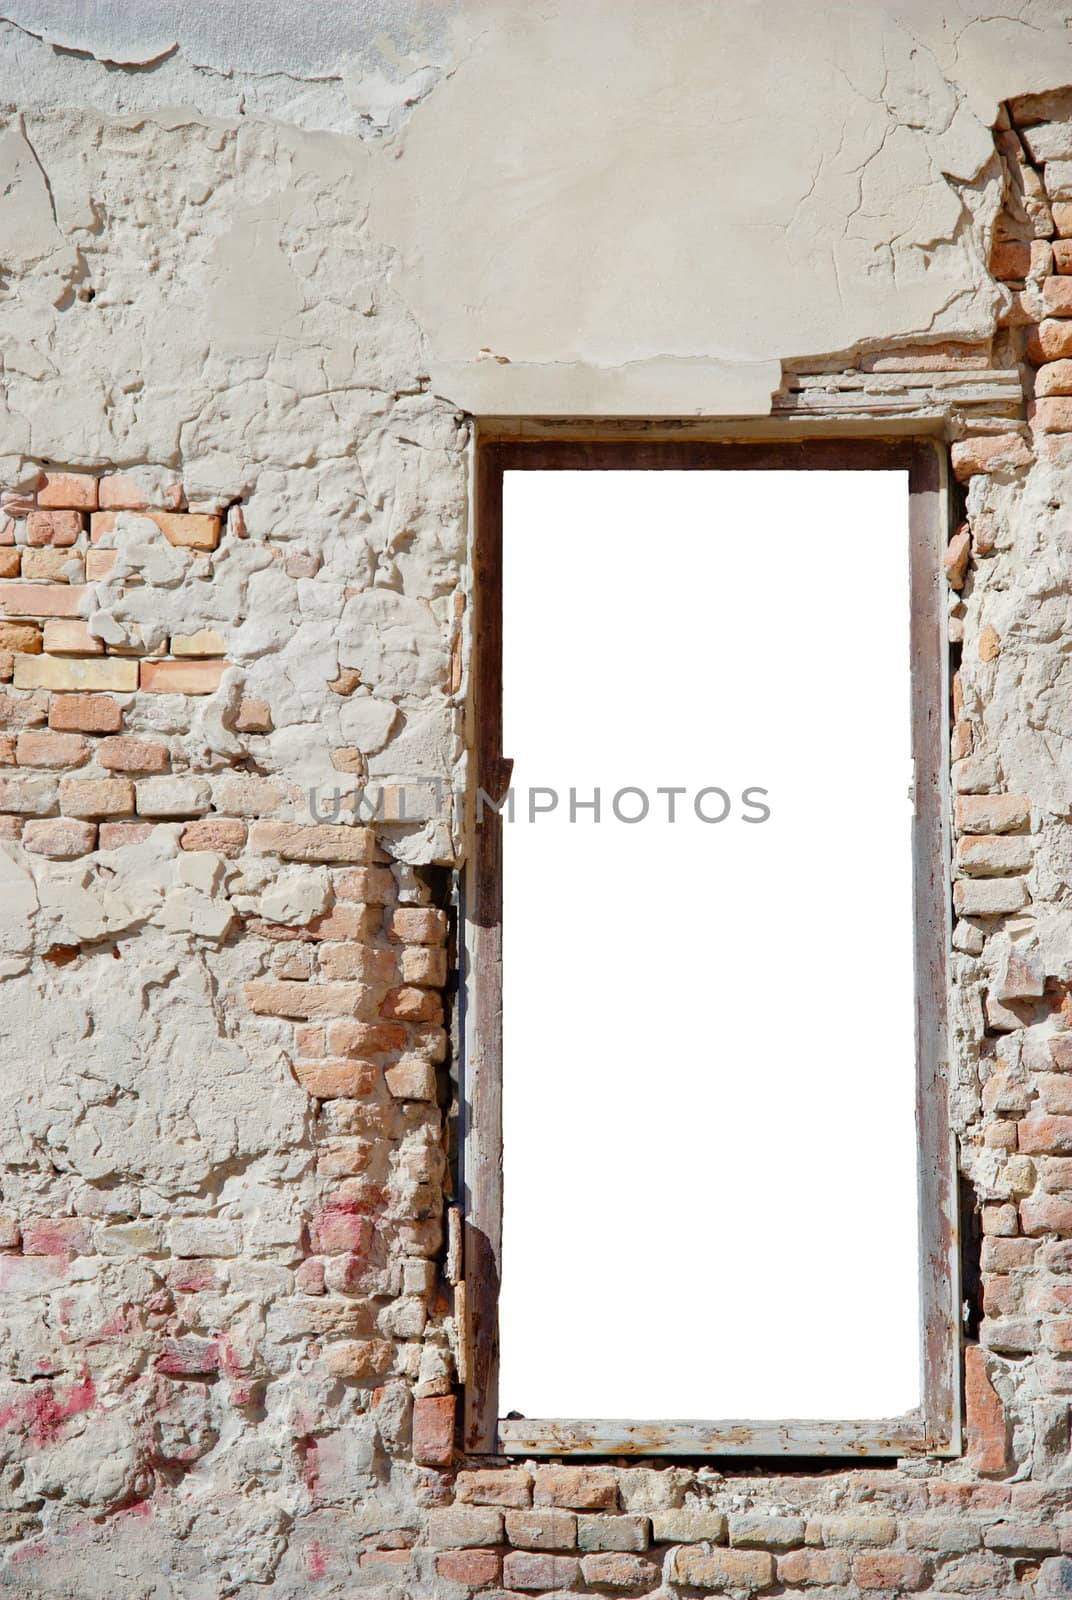 urban decay white isolated window frame template - ideal for image insertion